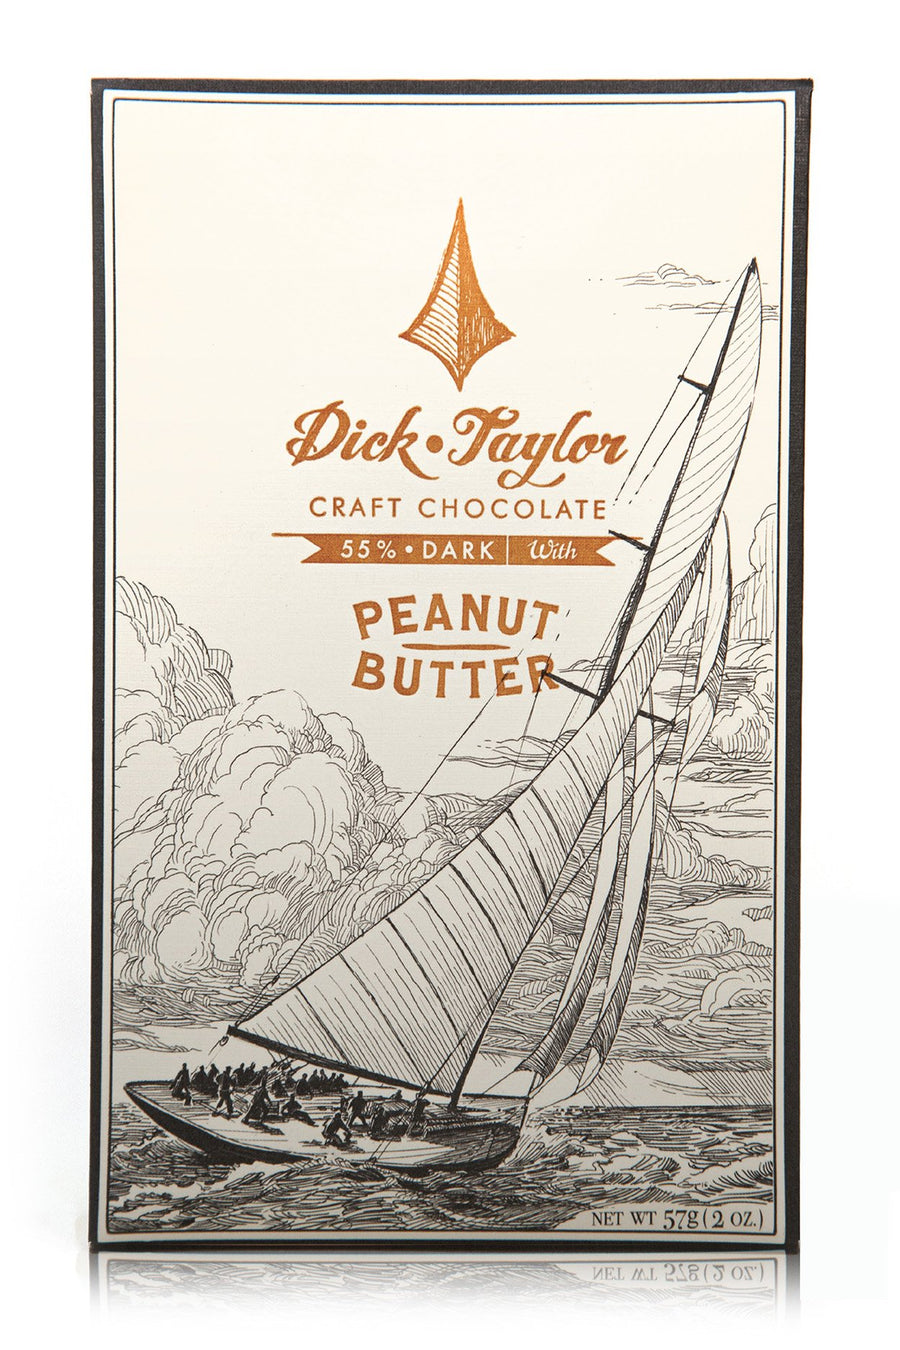 Dick Taylor 55% Dark Chocolate with Peanut Butter